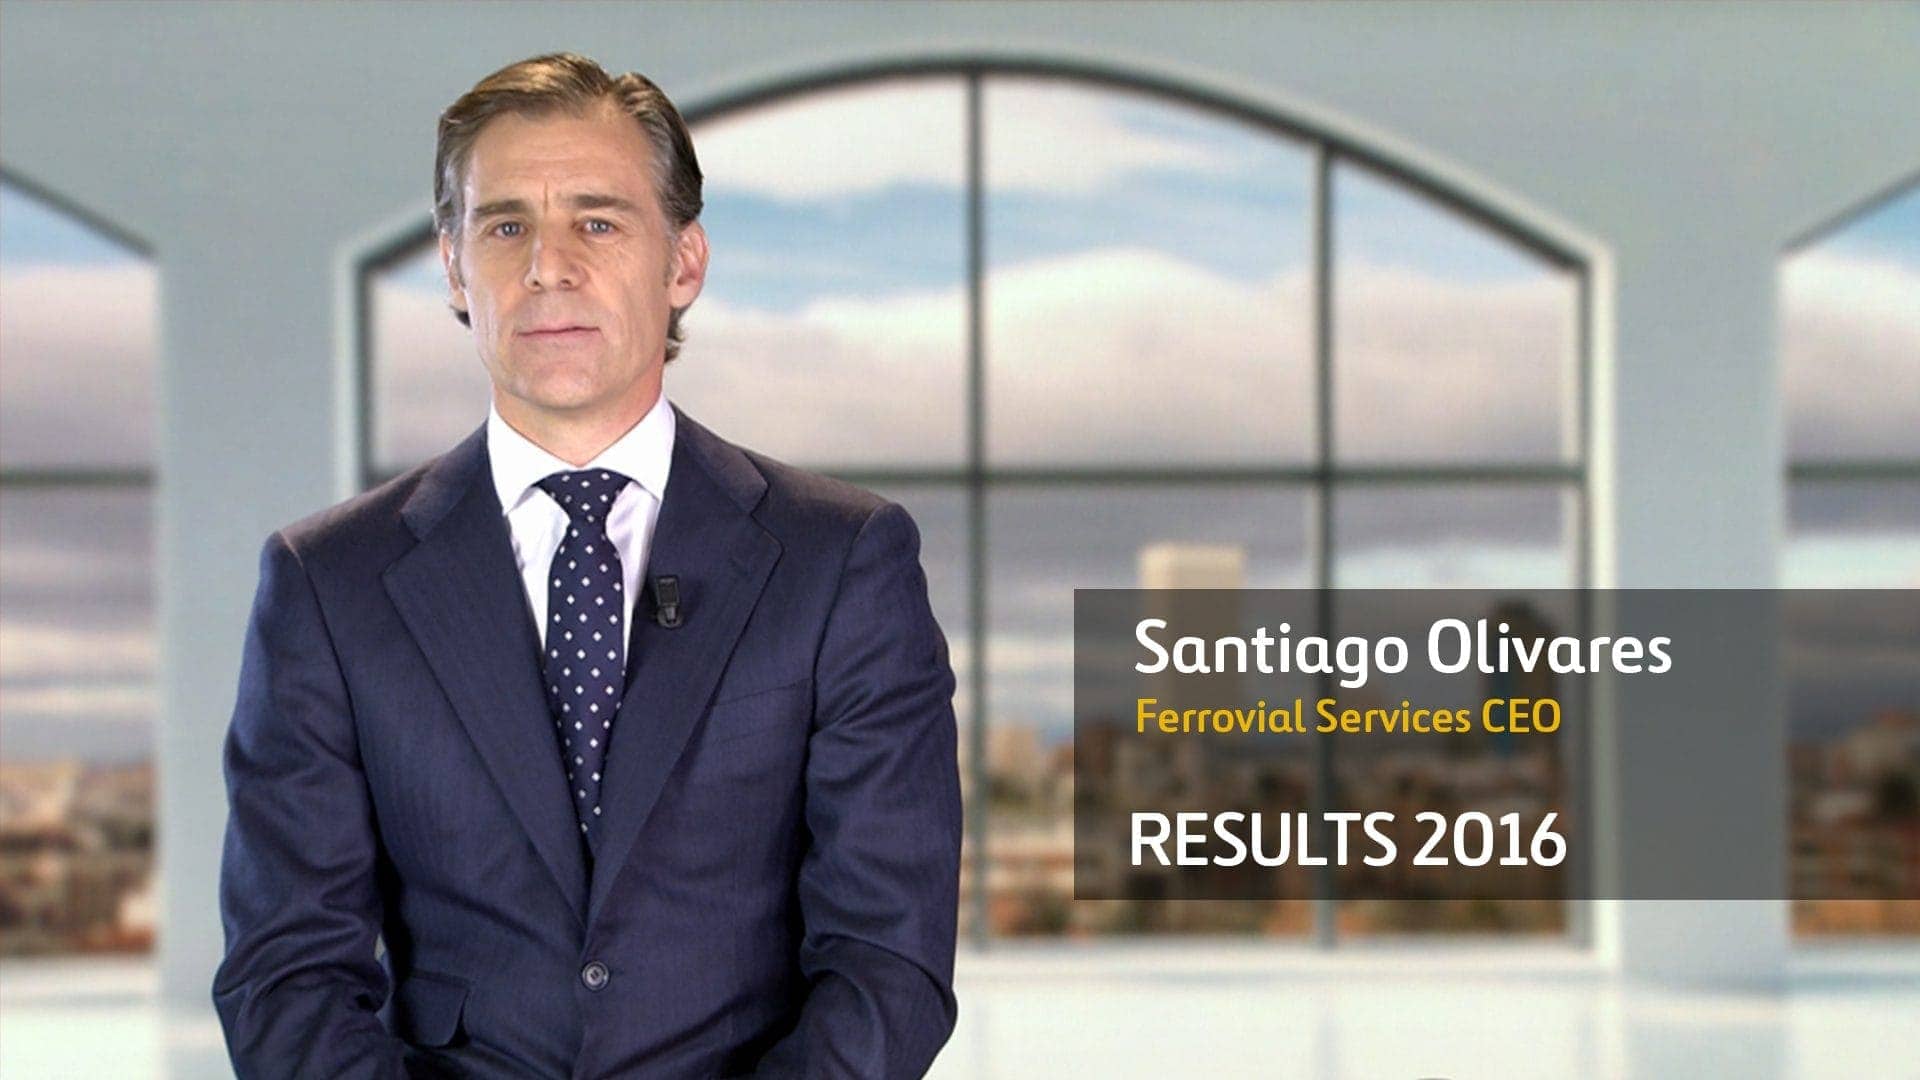 annual financial results 2016